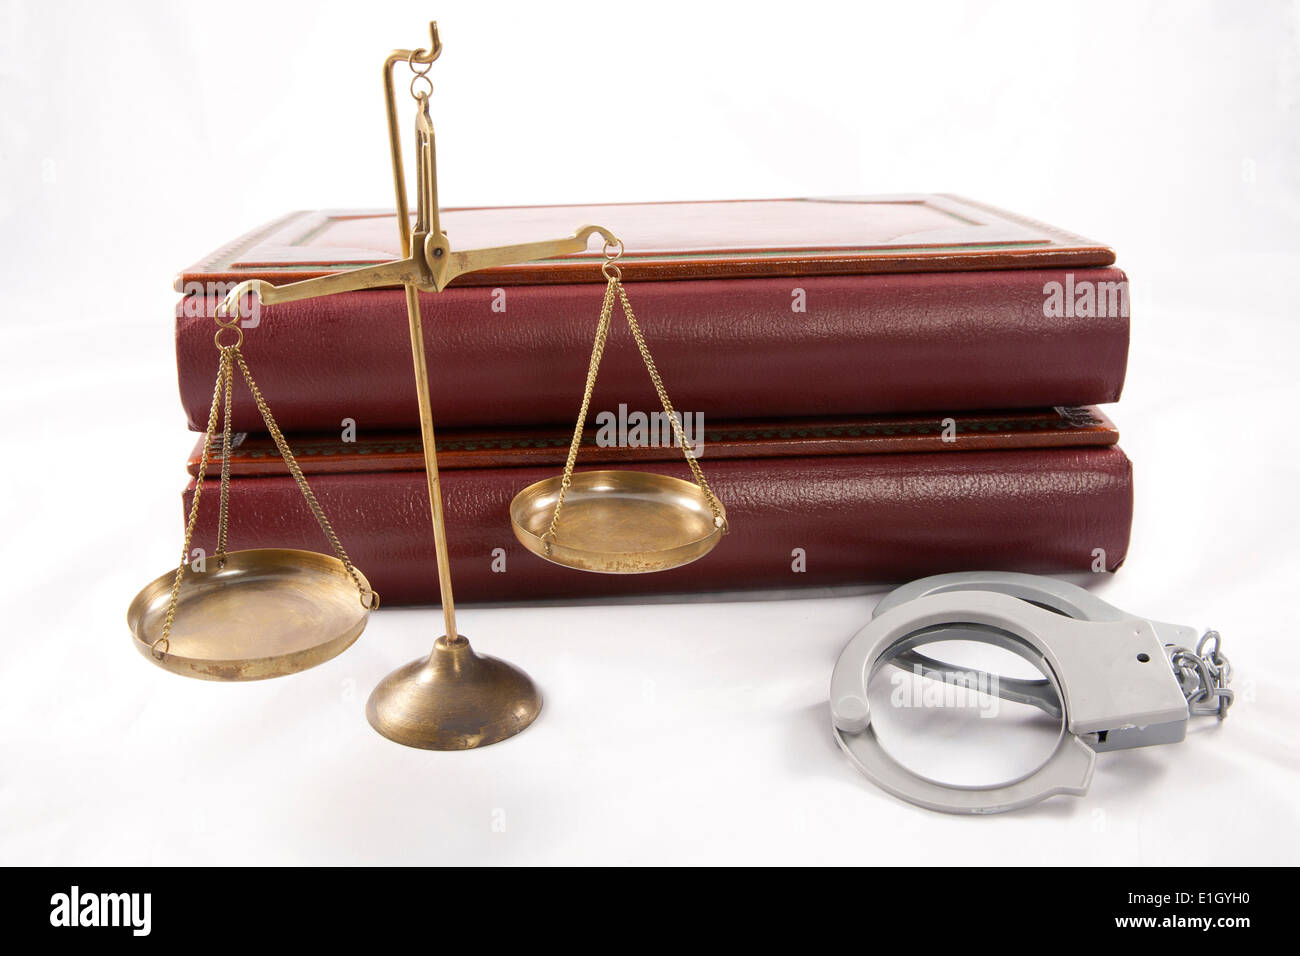 Legal scales, handcuffs and two blank leather bound books on white Stock Photo